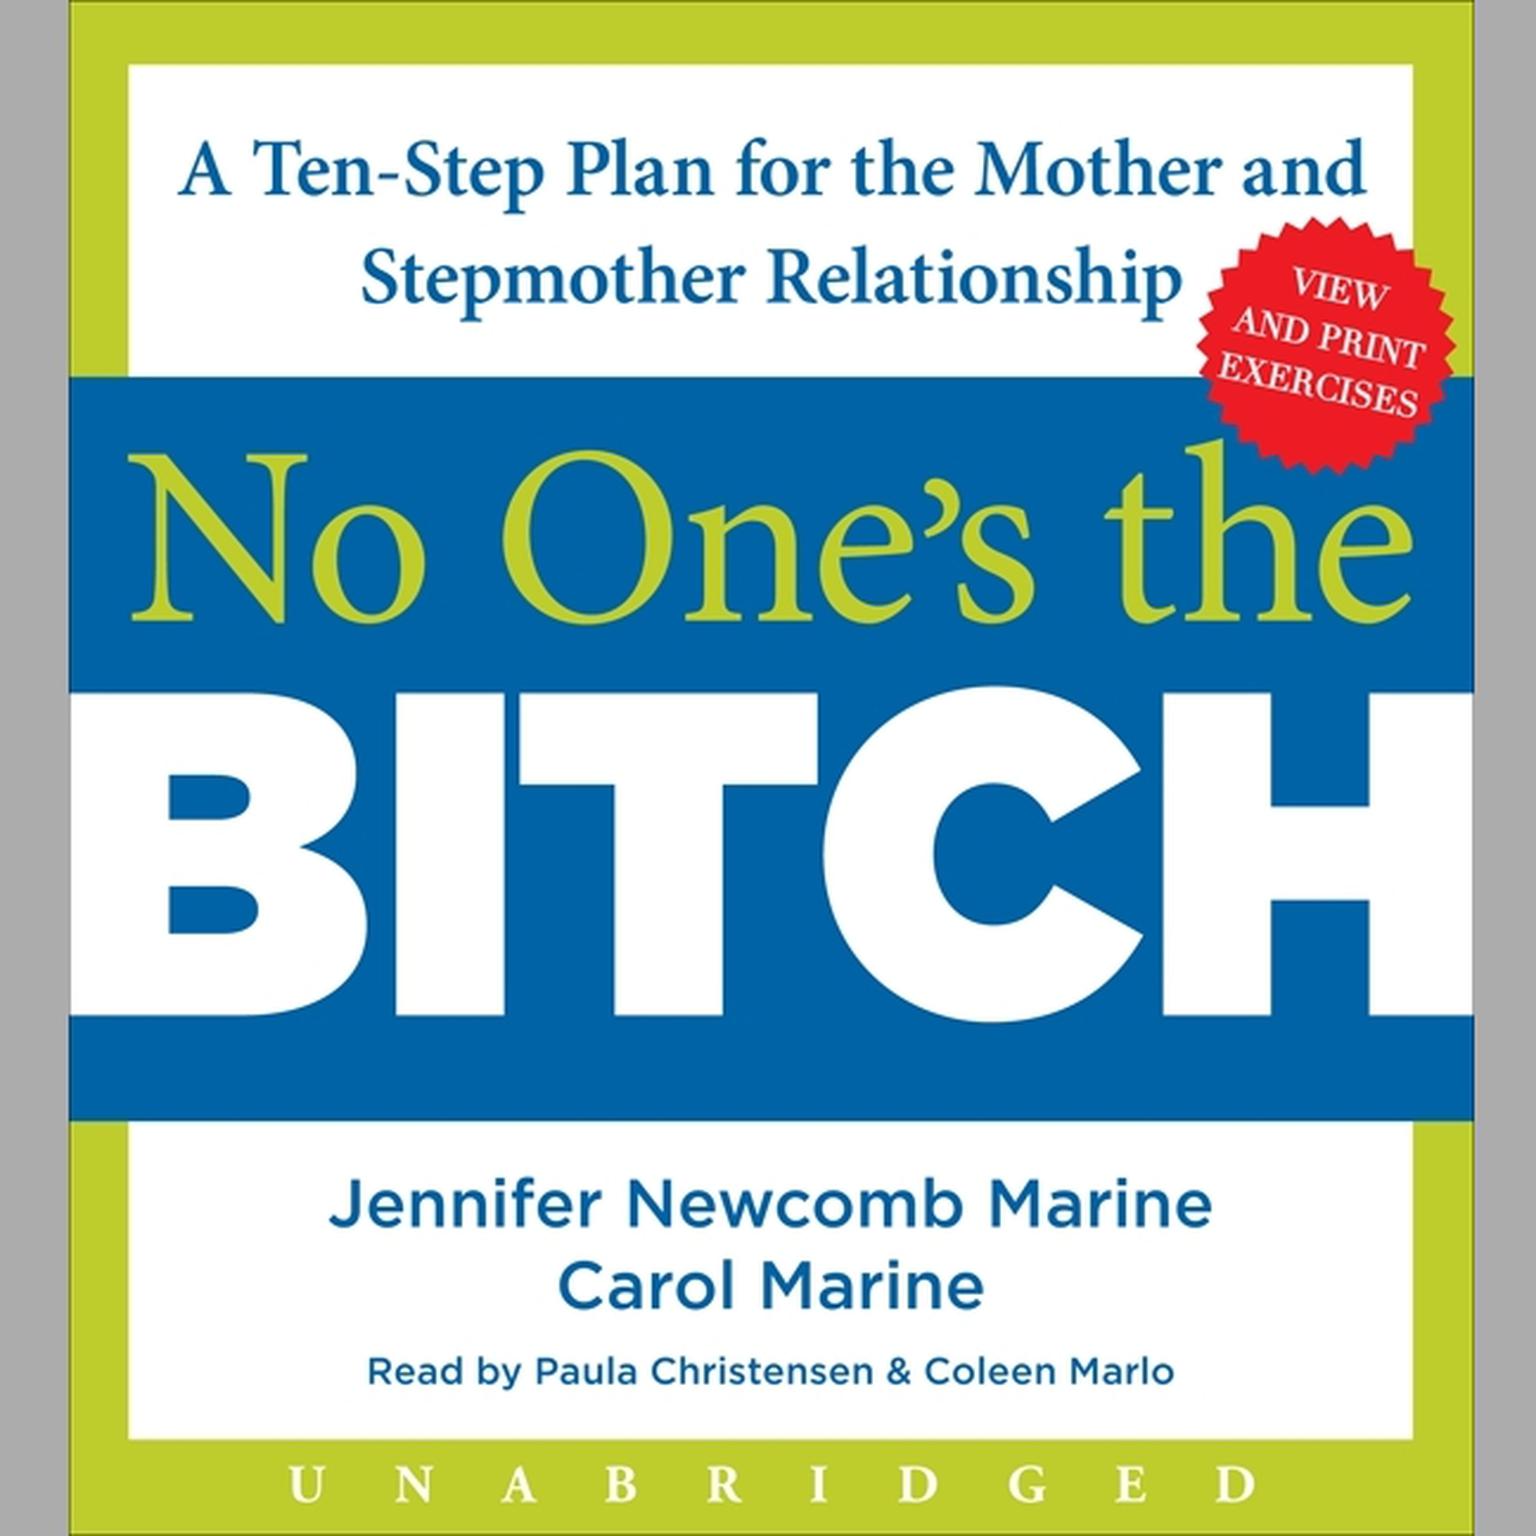 No Ones the Bitch: A Ten-Step Plan for the Mother and Stepmother Relationship Audiobook, by Jennifer Newcomb Marine